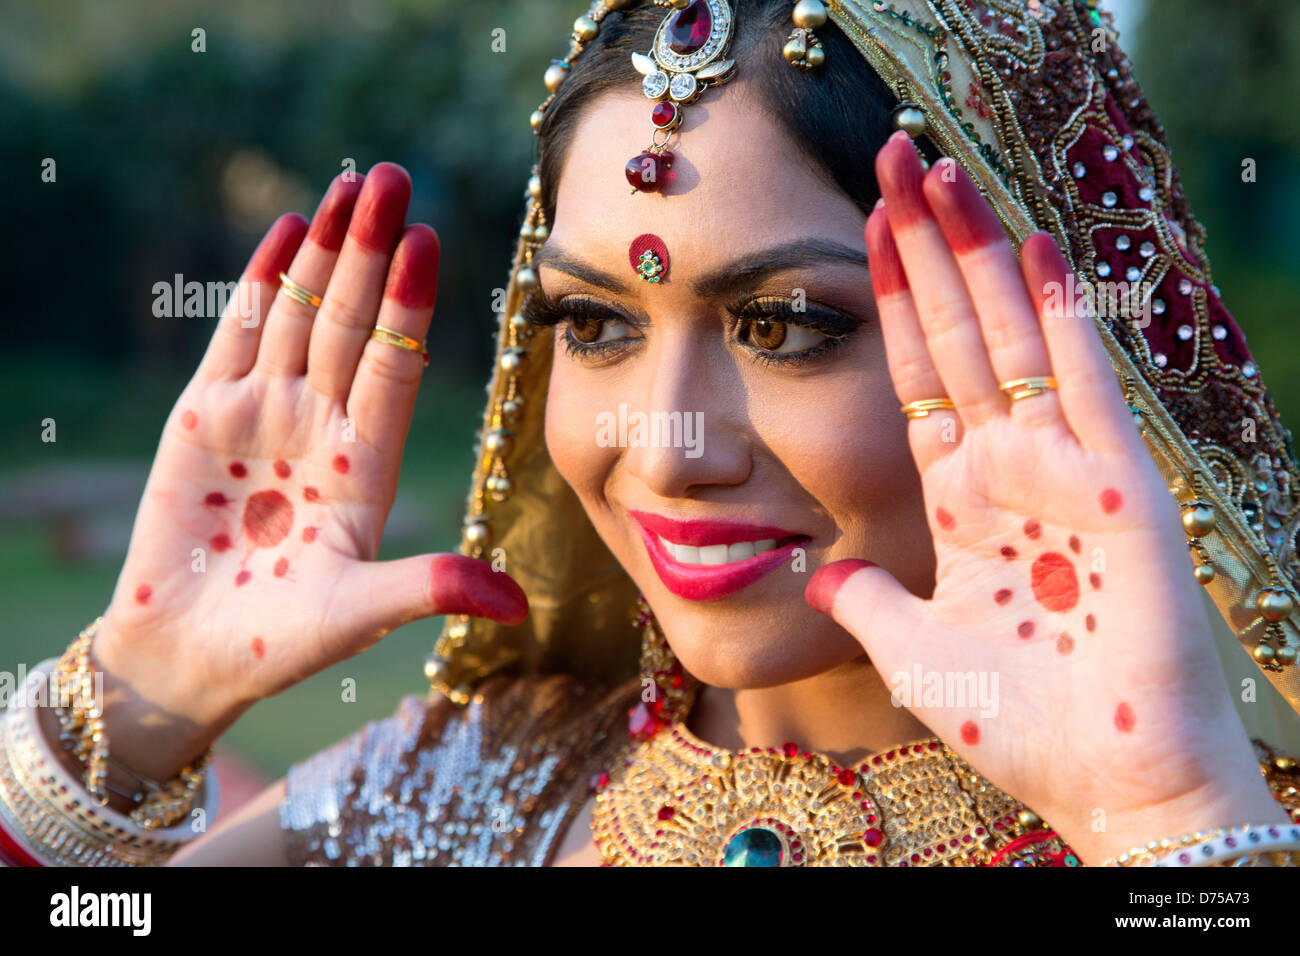 Beautiful Indian Bride In Traditional Hindu Wedding Attire With Lehnga  Bridal Bangles And Shy Pose Stock Photo - Download Image Now - iStock